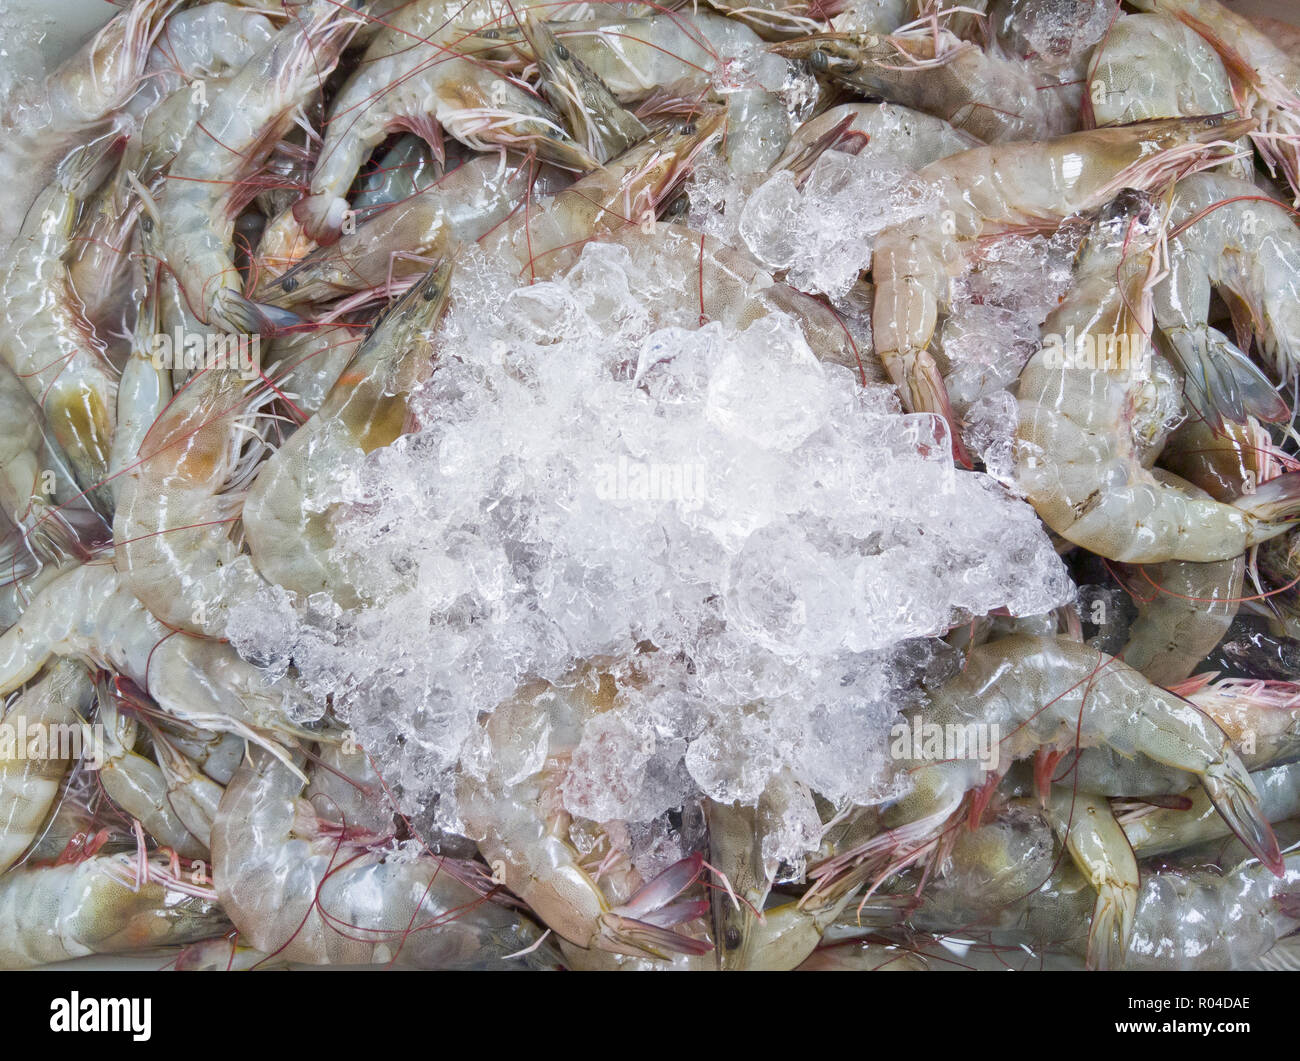 Fresh shrimp pile in the plastic platter with the crushed ice in the local Thai market. Stock Photo